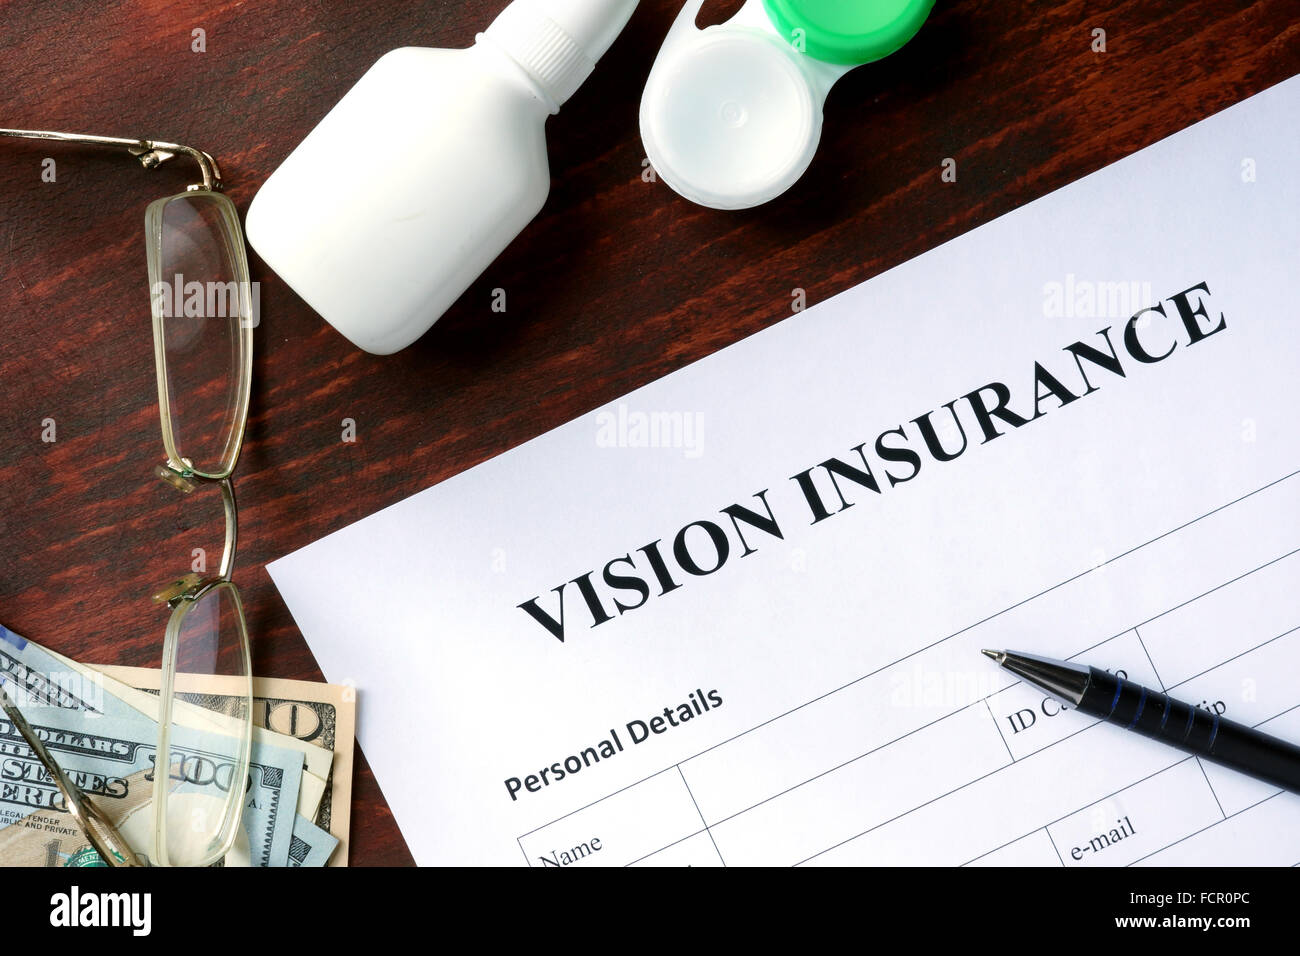 Vision insurance form on the wooden table. Stock Photo